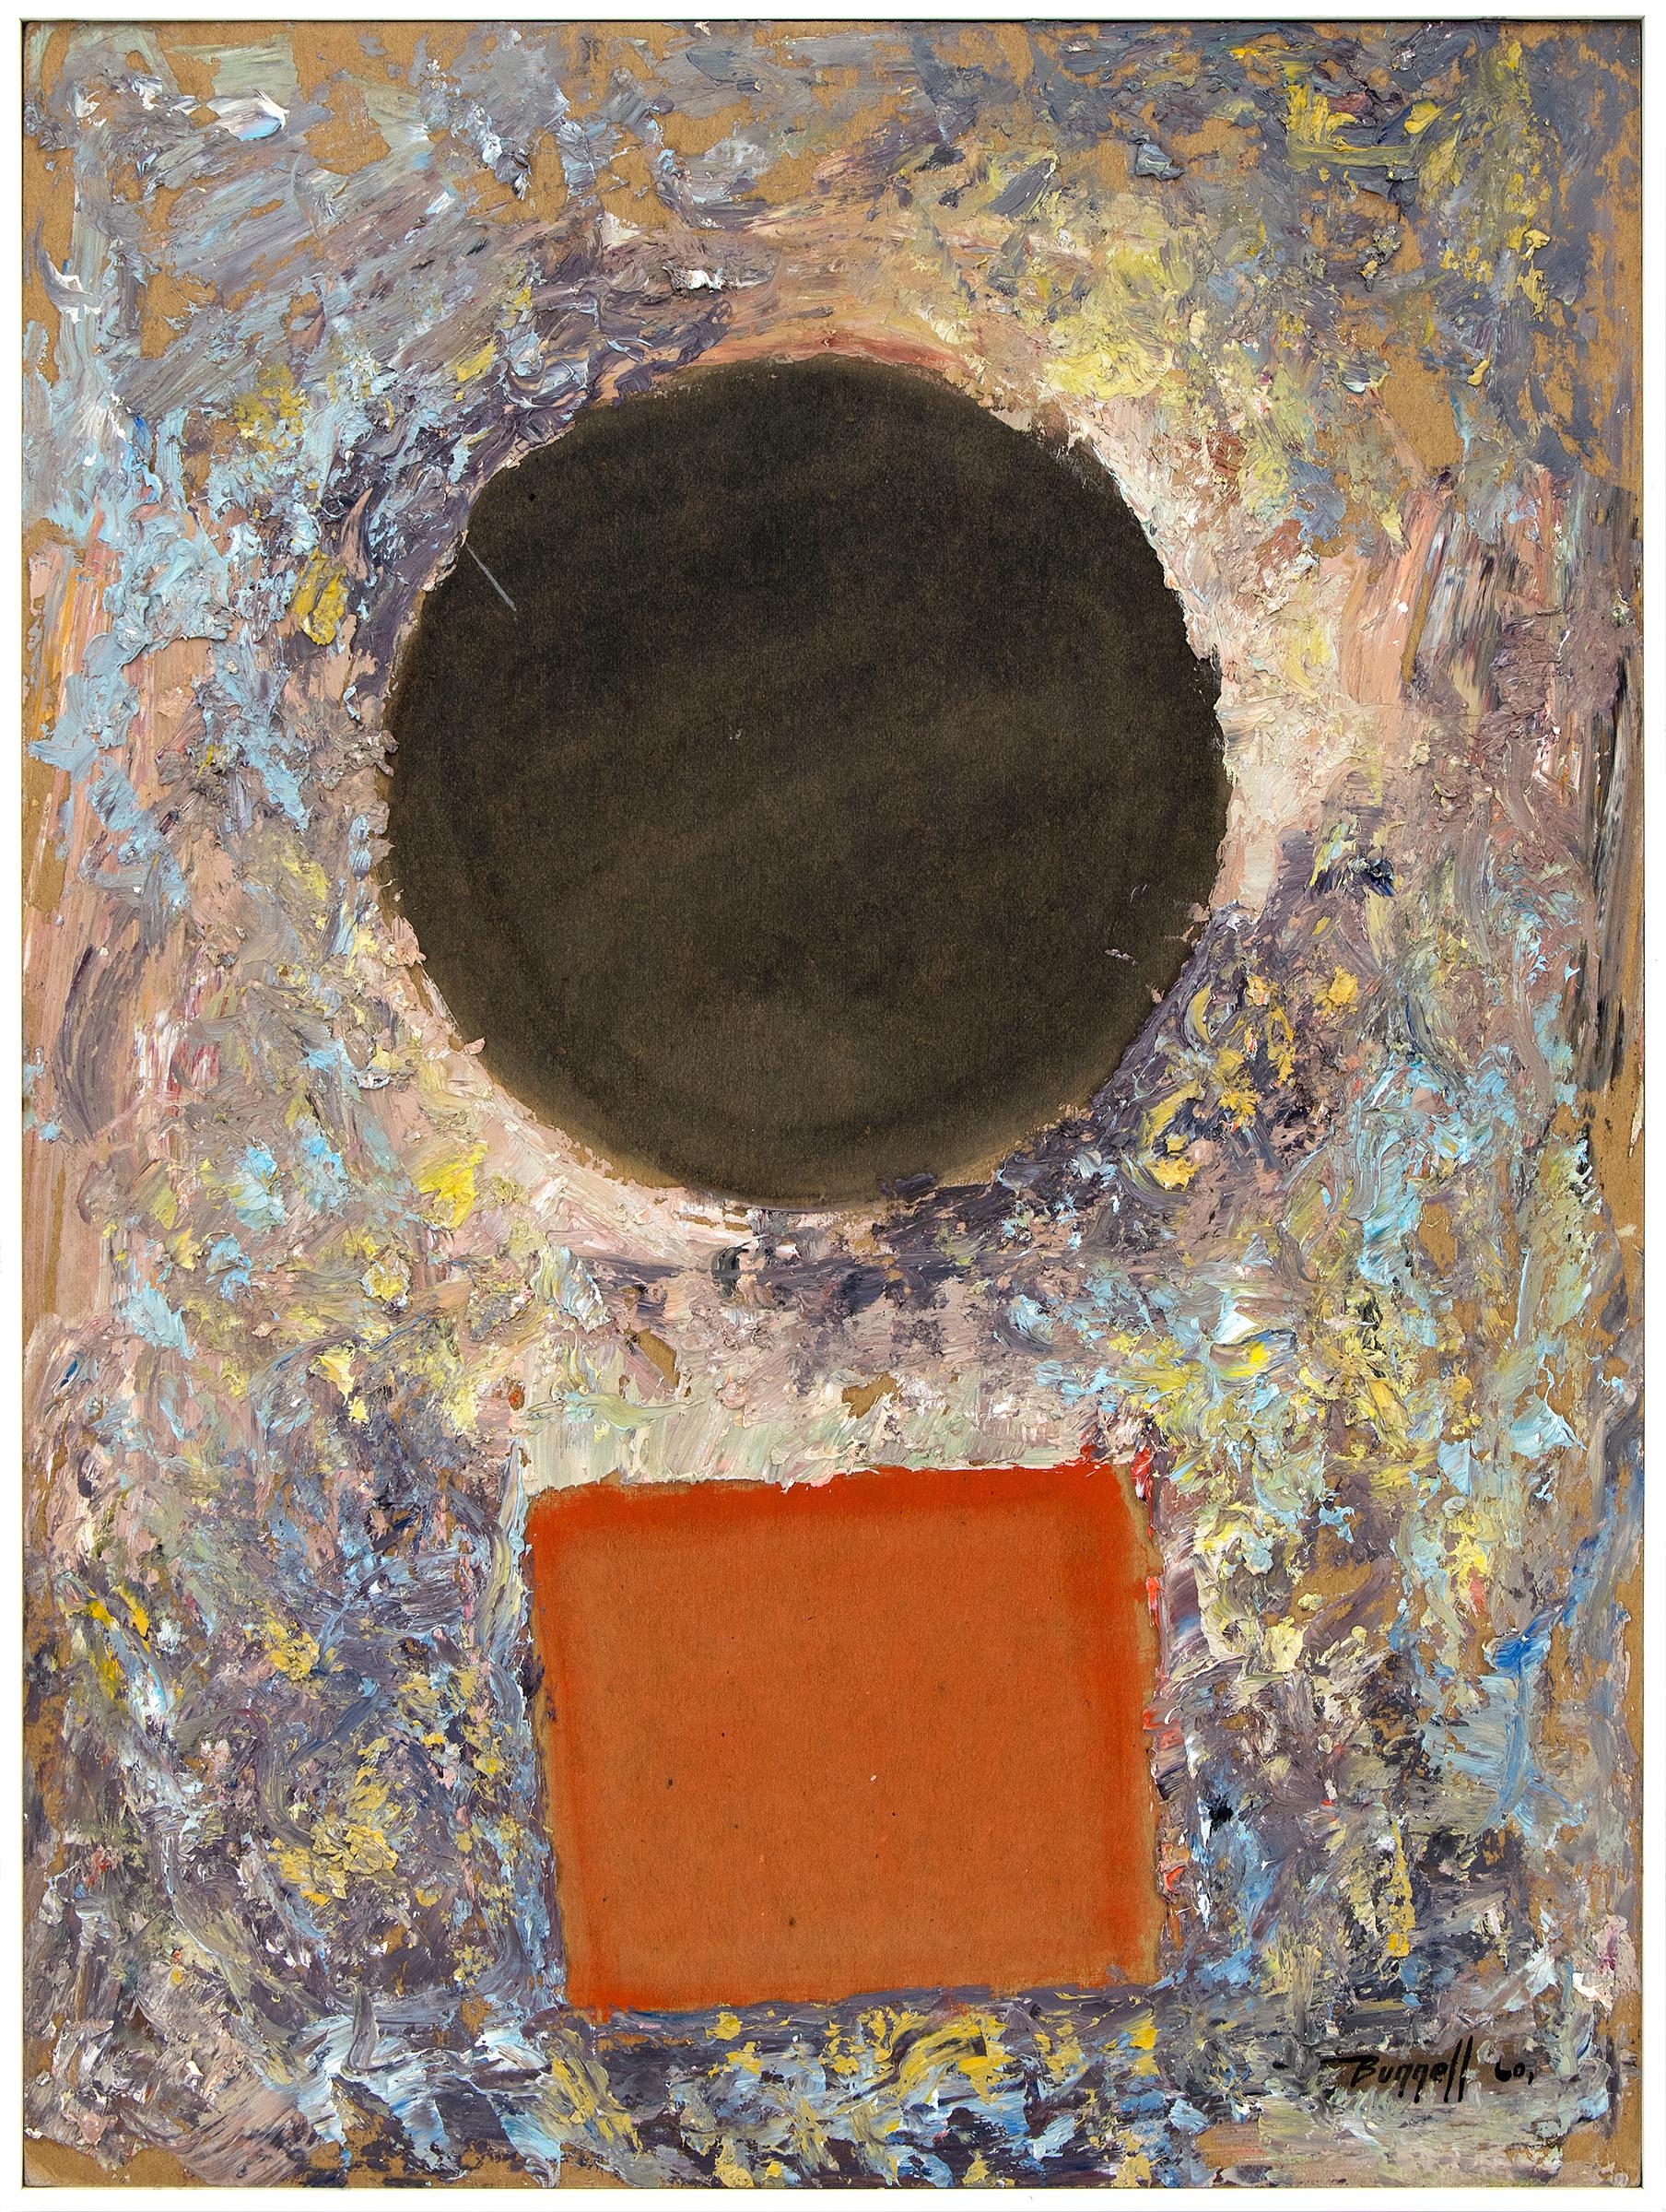 Charles Ragland Bunnell Abstract Painting - 1960s Abstract Geometric Textured Oil Painting, Orange, Black, Circle & Square